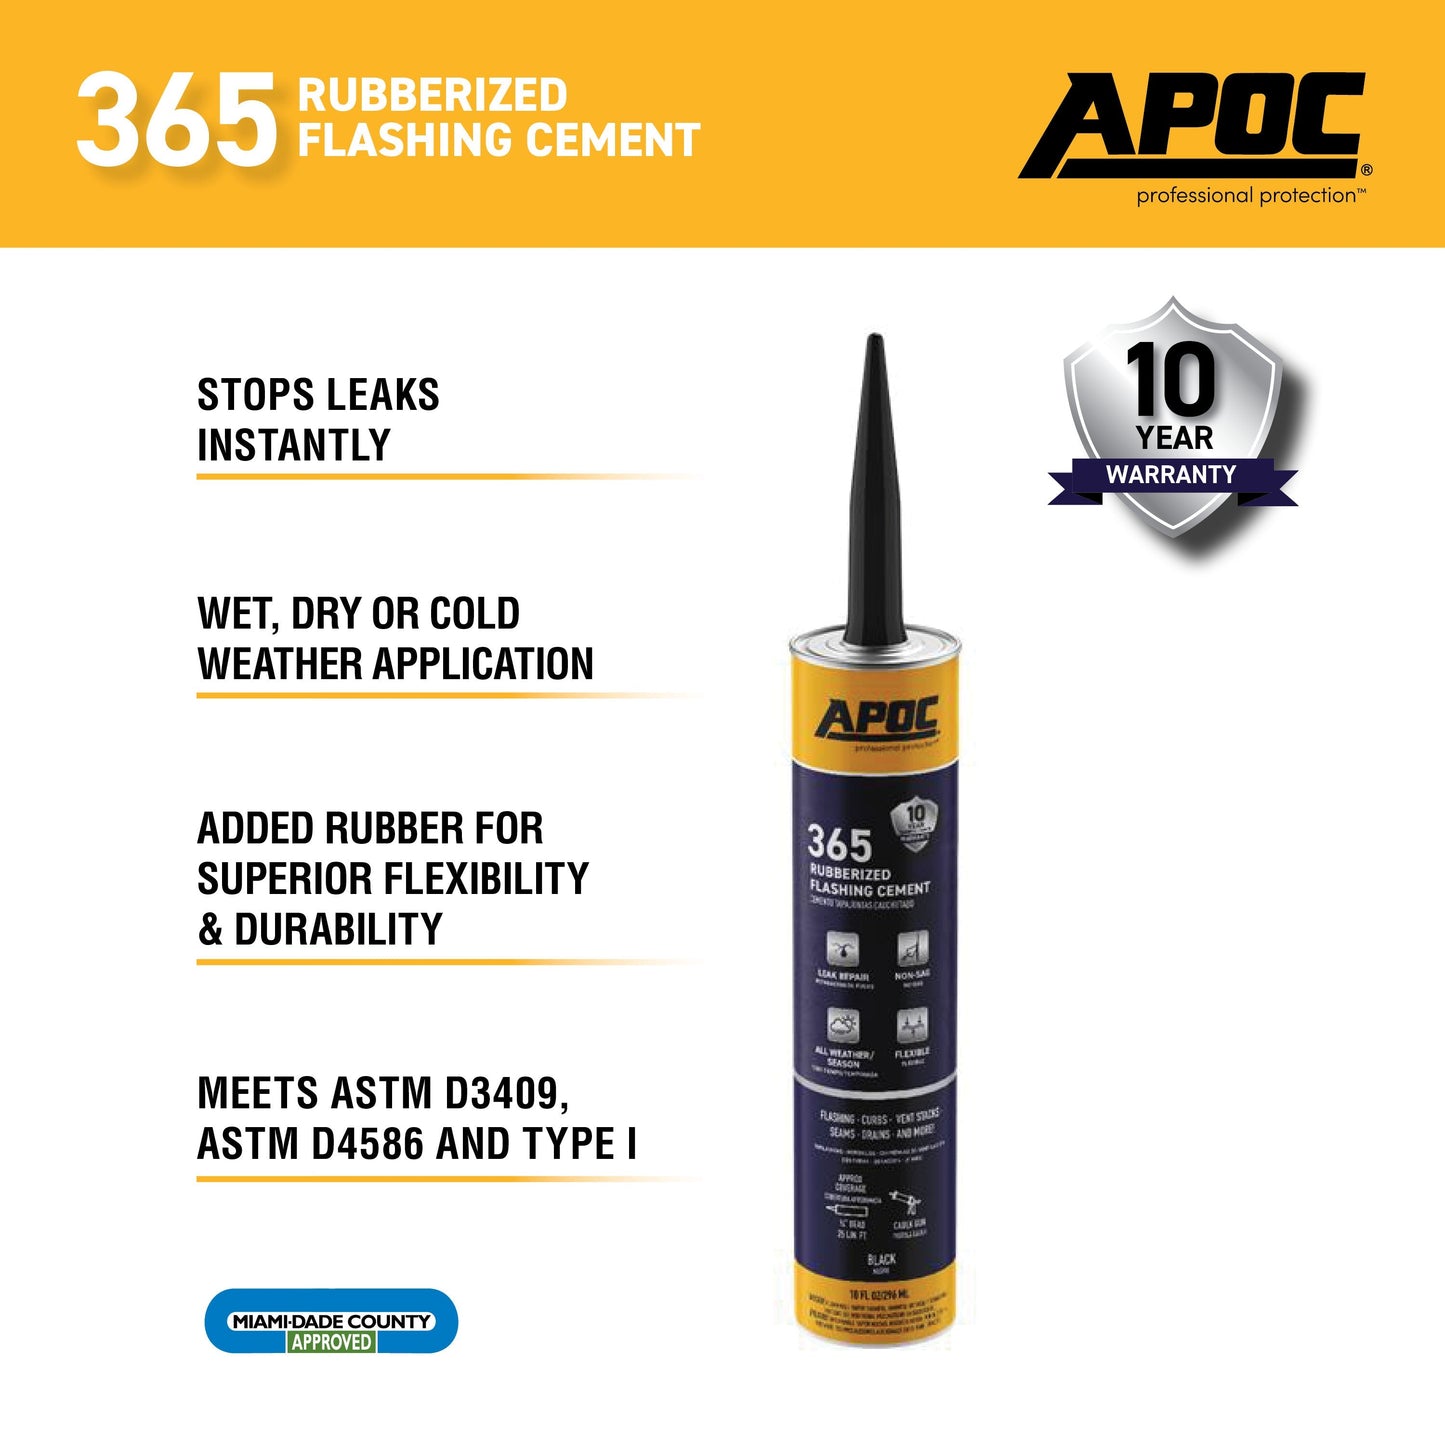 APOC<sup>®</sup> 365<br> Rubberized Flashing Cement